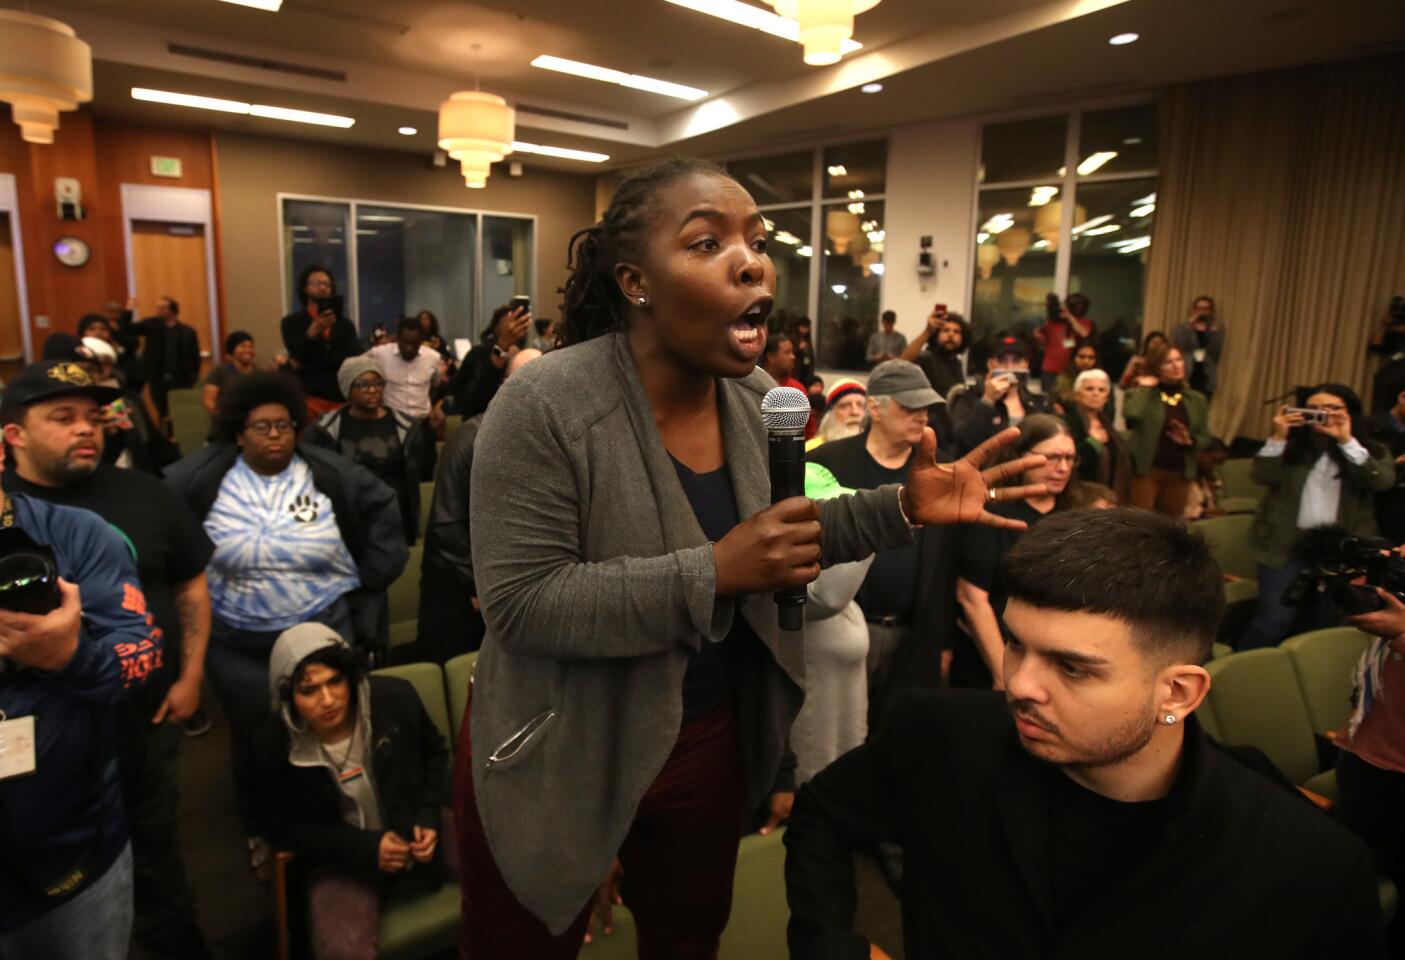 Activists disrupt the City Council meeting in Sacramento on Tuesday, a day after more than 80 people were arrested during a march through East Sacramento to protest the district attorney's decision not to bring criminal charges against the officers who fatally shot Stephon Clark.